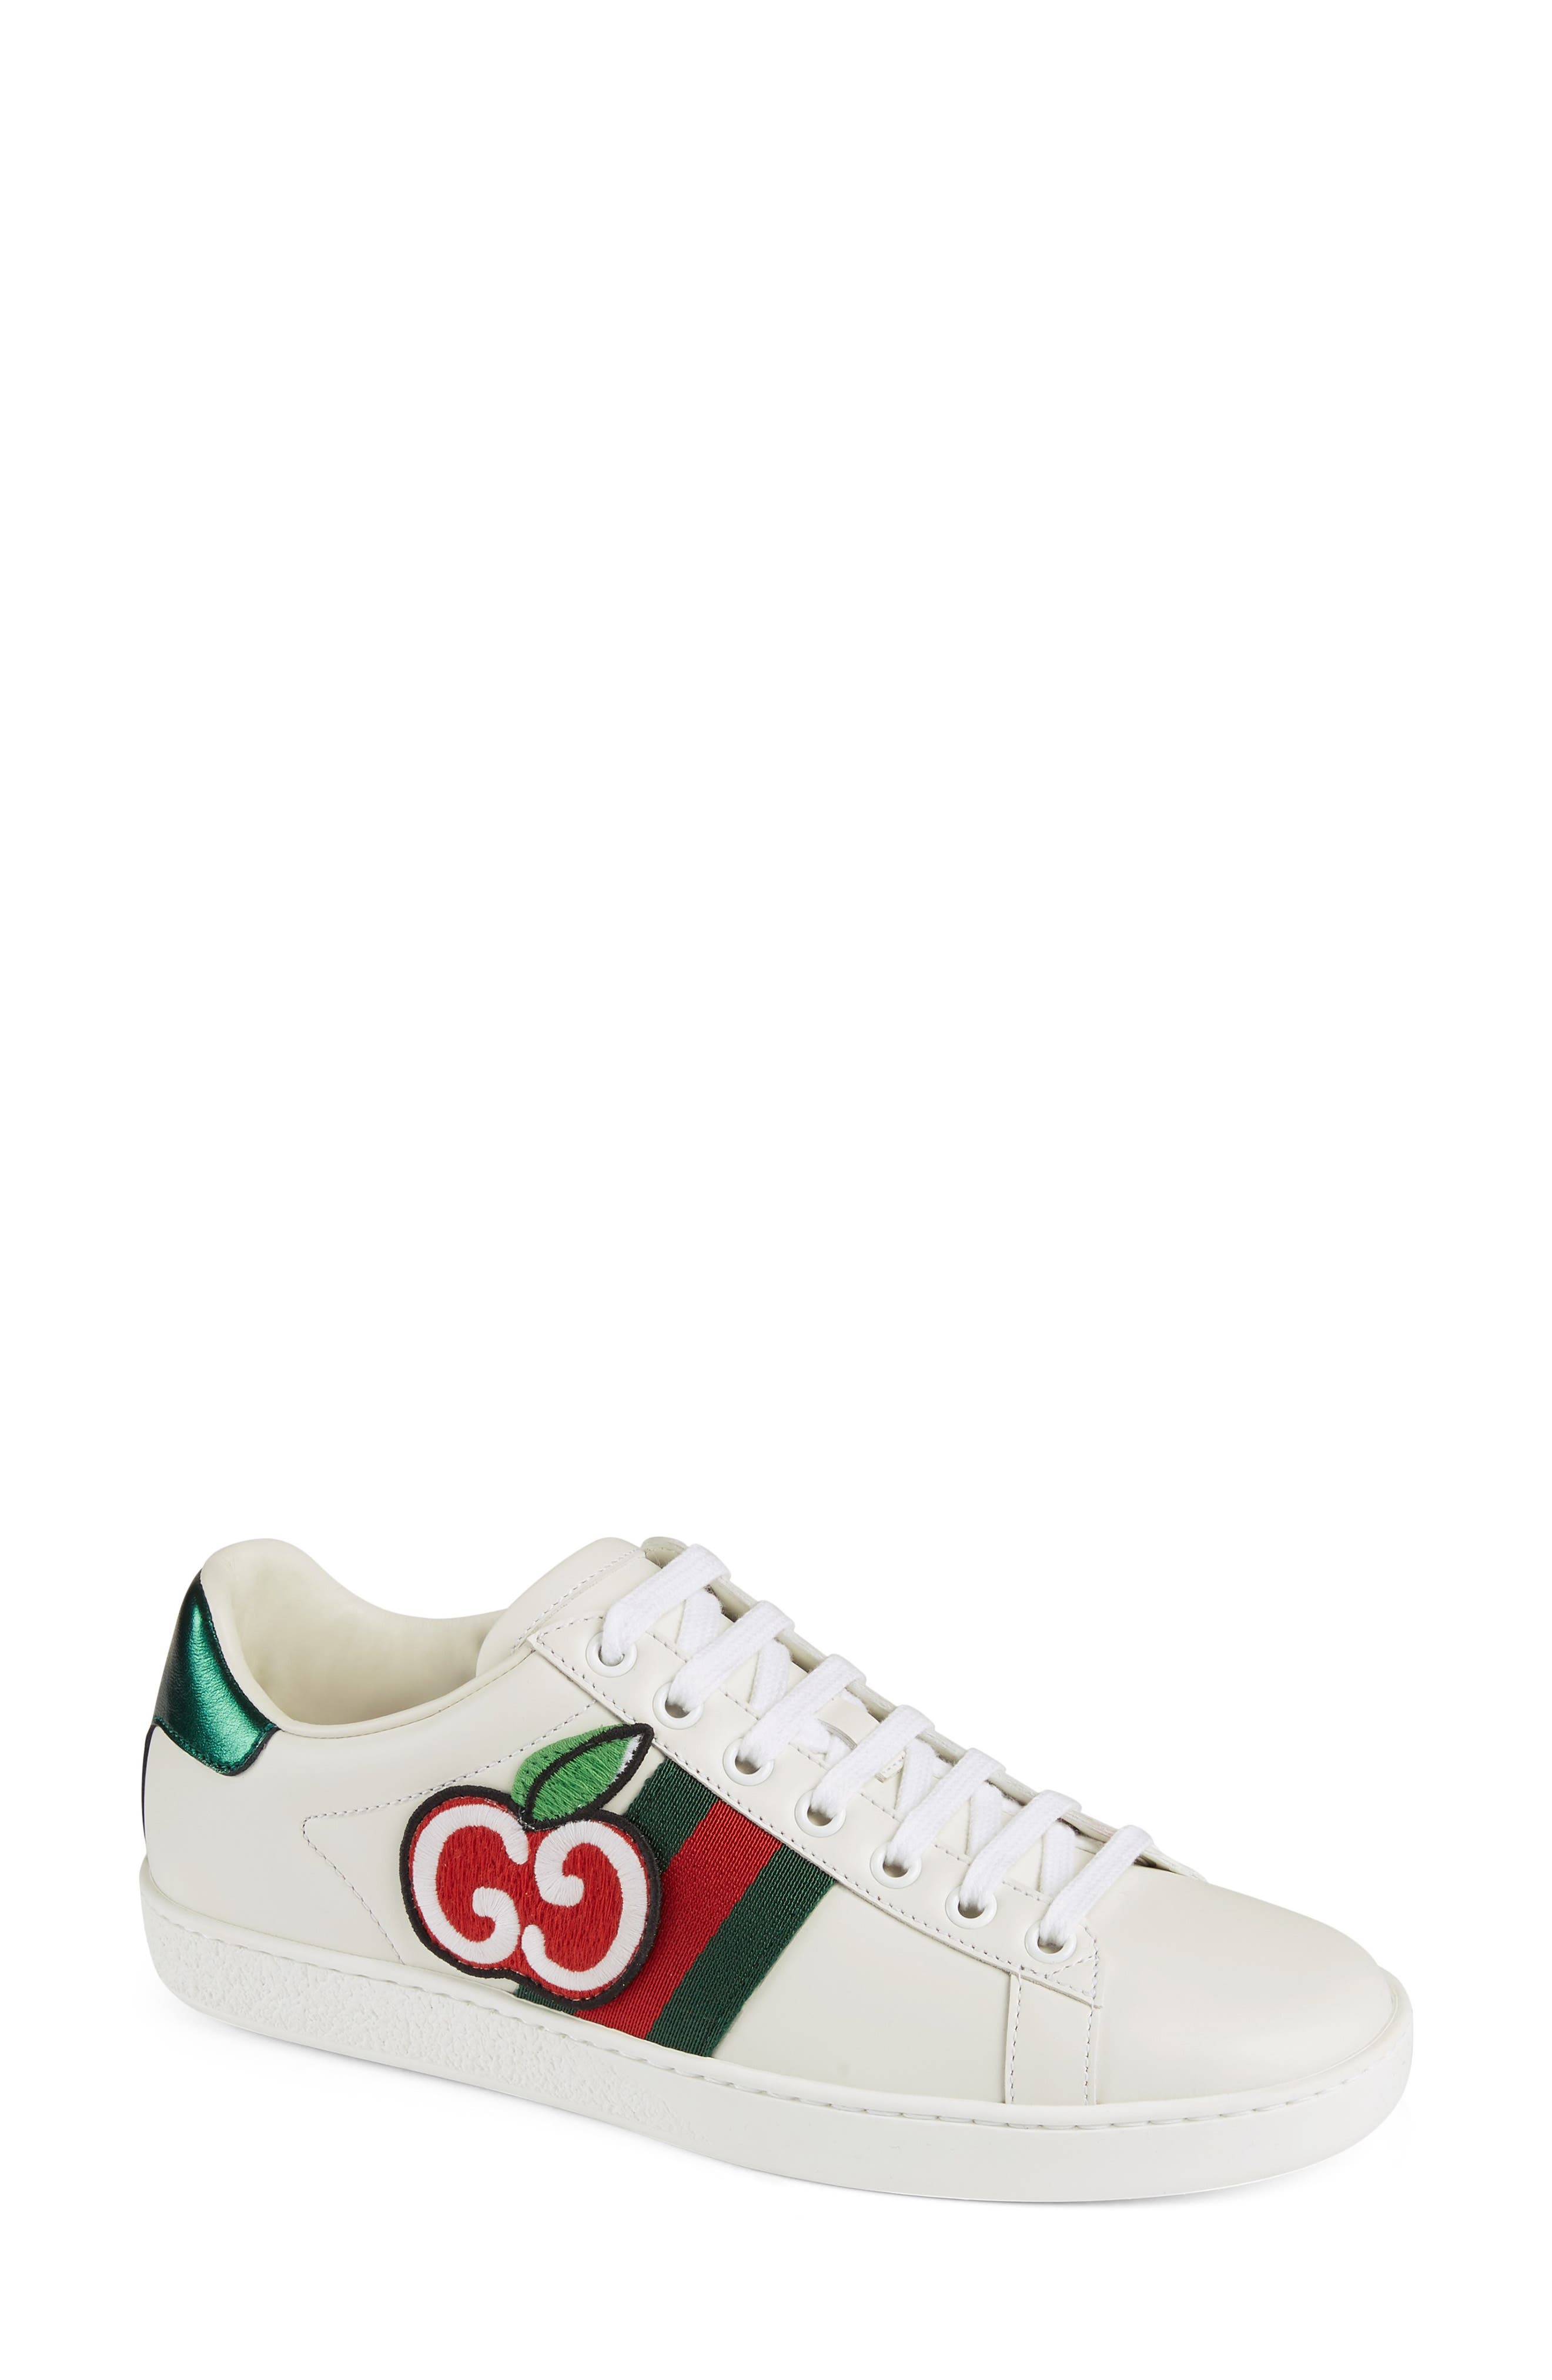 gucci shoes double g